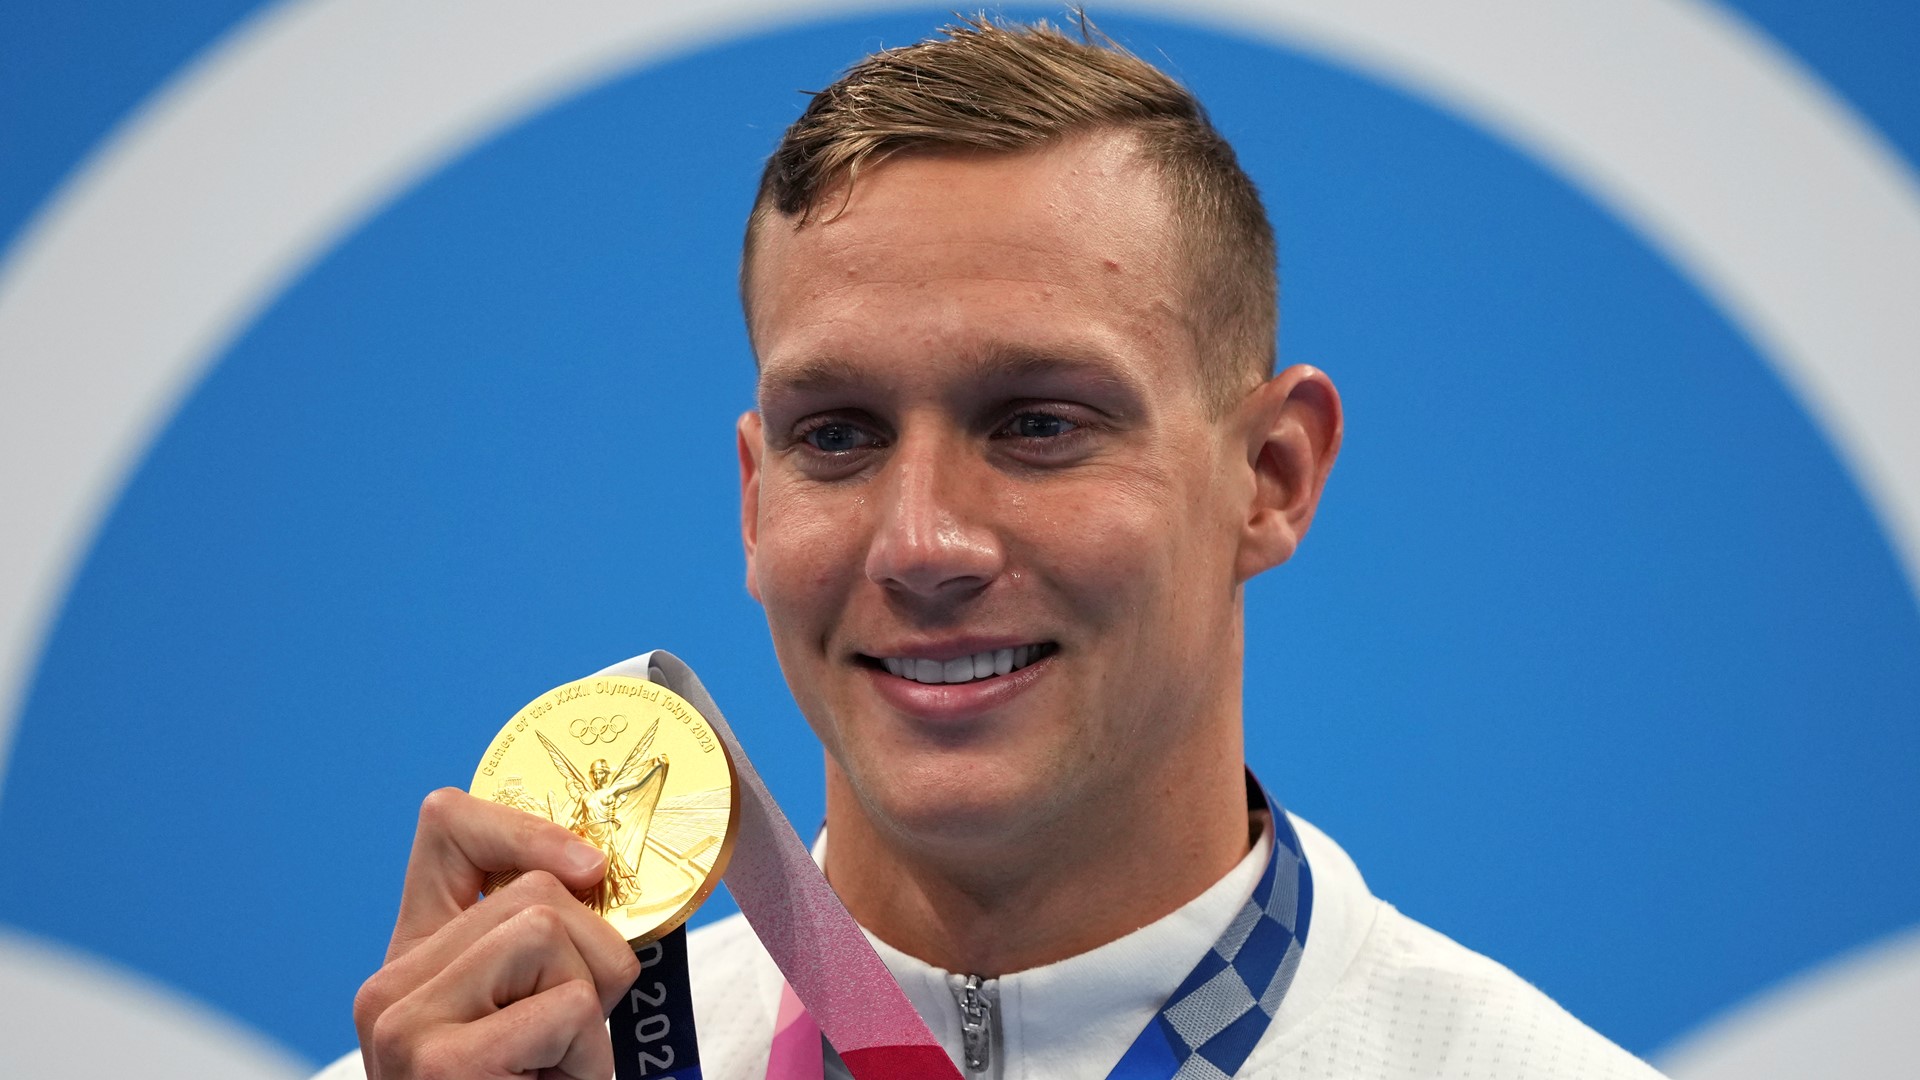 At an Olympics where some of America's biggest stars have faltered, Caeleb Dressel lived up to the hype.